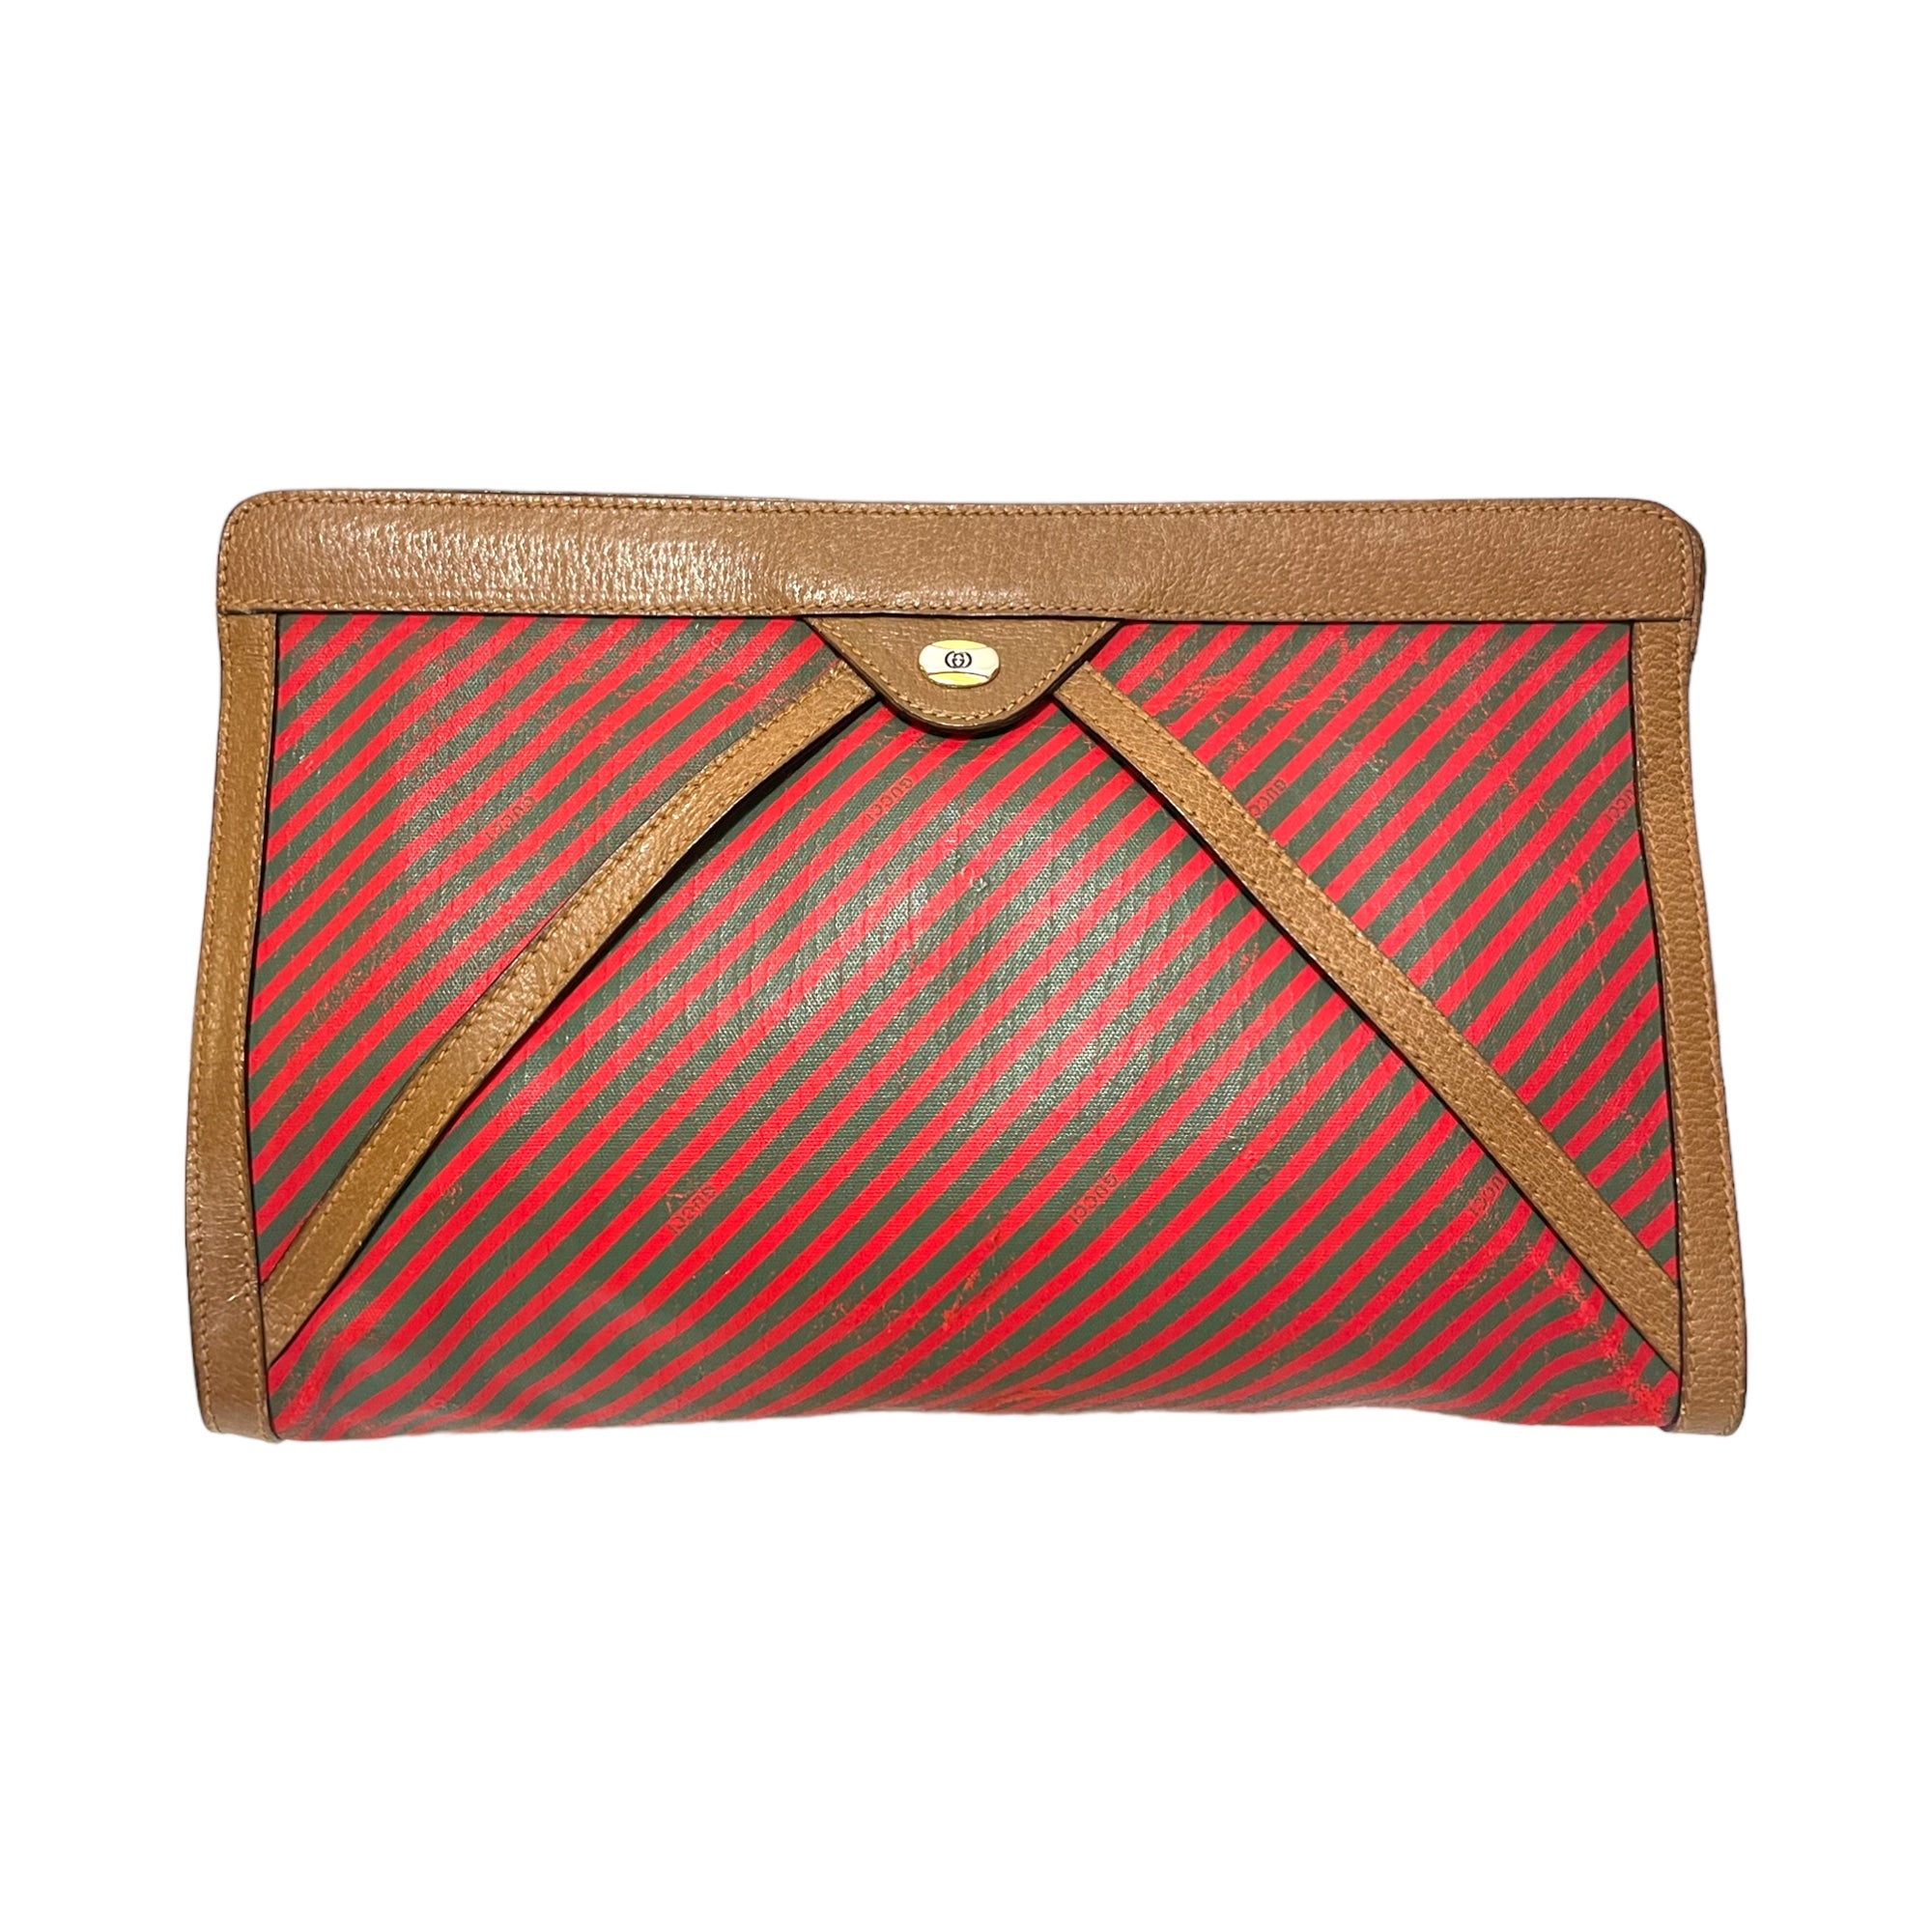 GUCCI Vintage Green & Red Classic Web Motif Print Pouch with Leather Trim